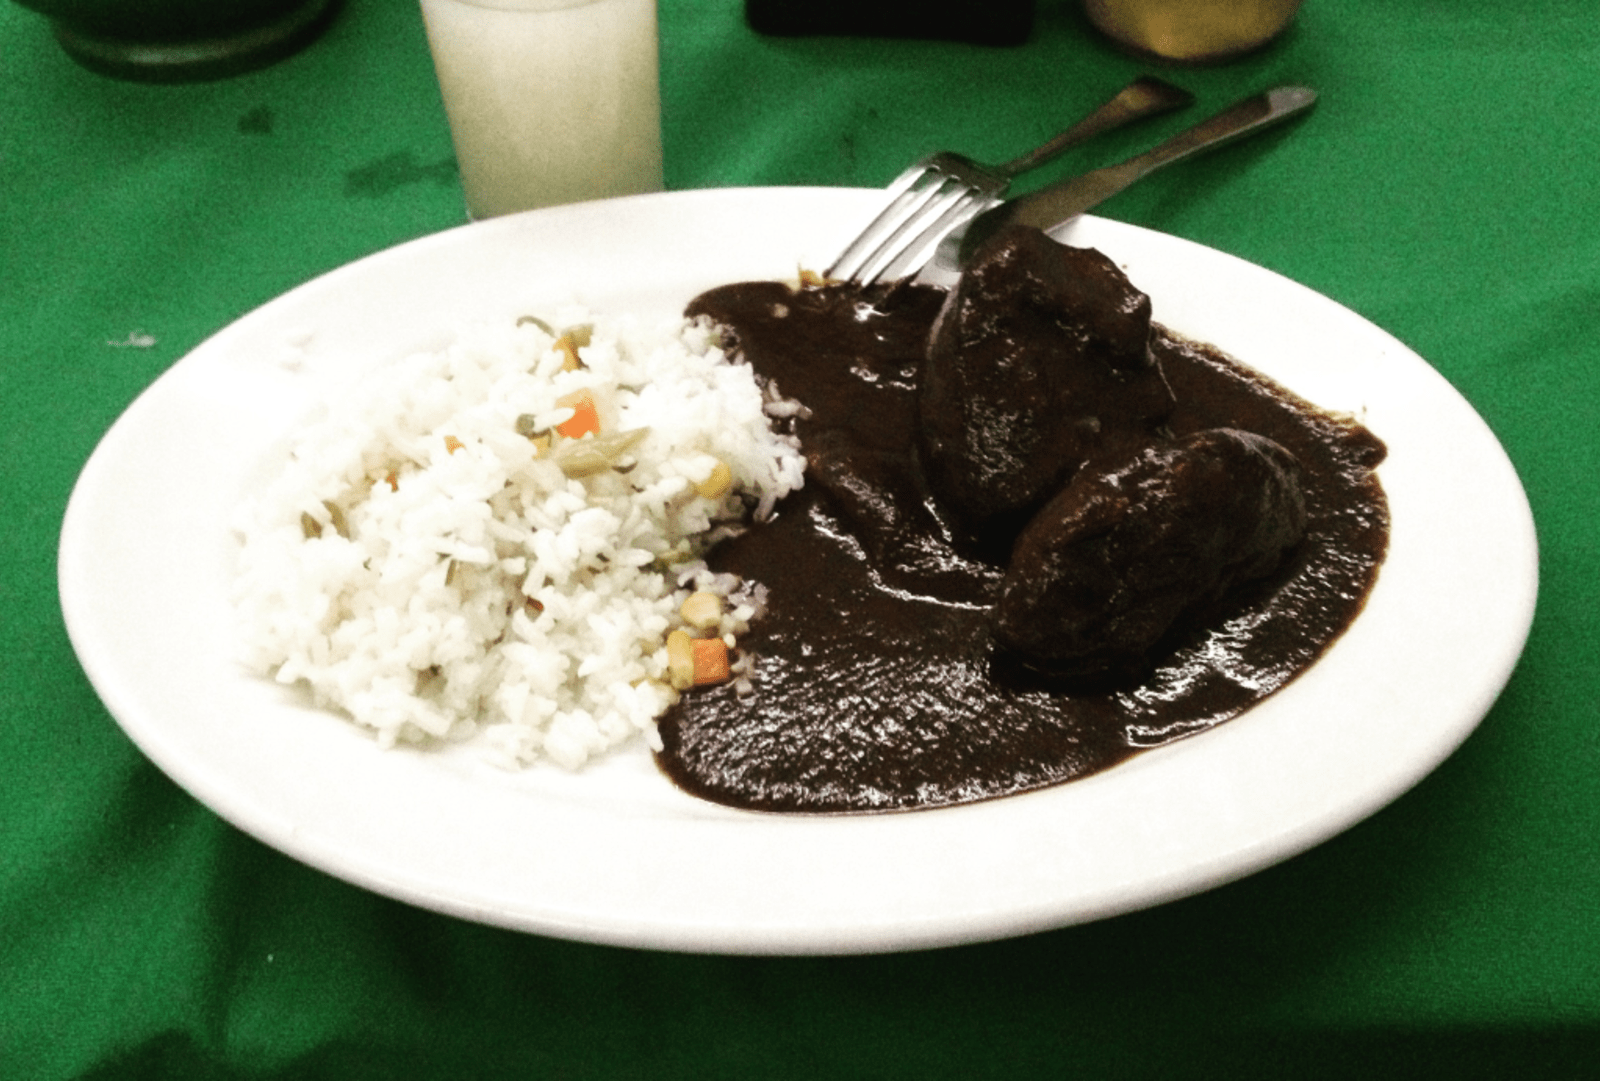 A Mexican meal served with mole sauce.